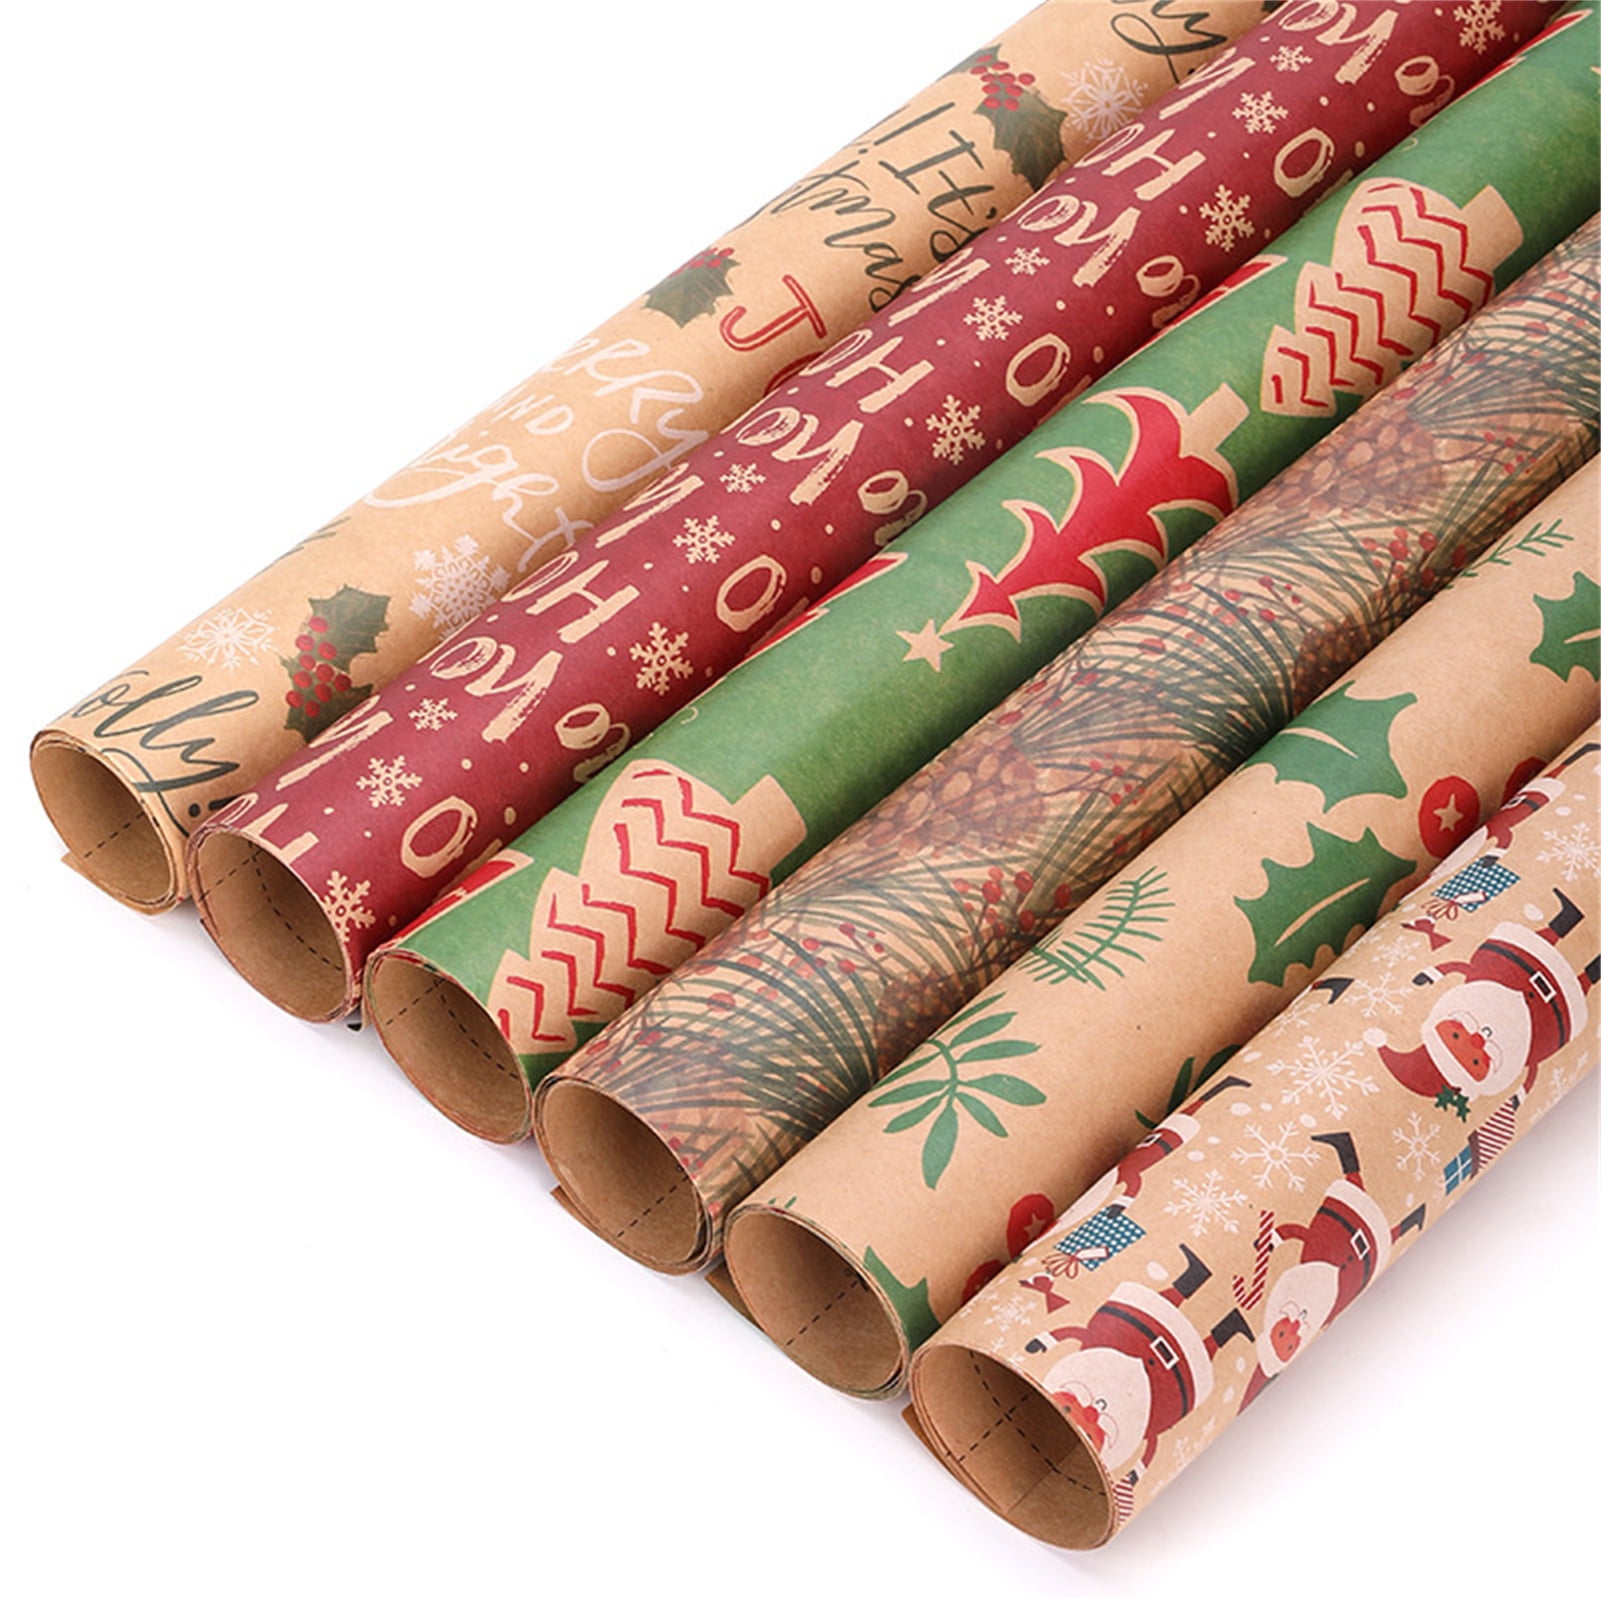  1PC Decorative Fun Wrapping Paper Personalized Gift